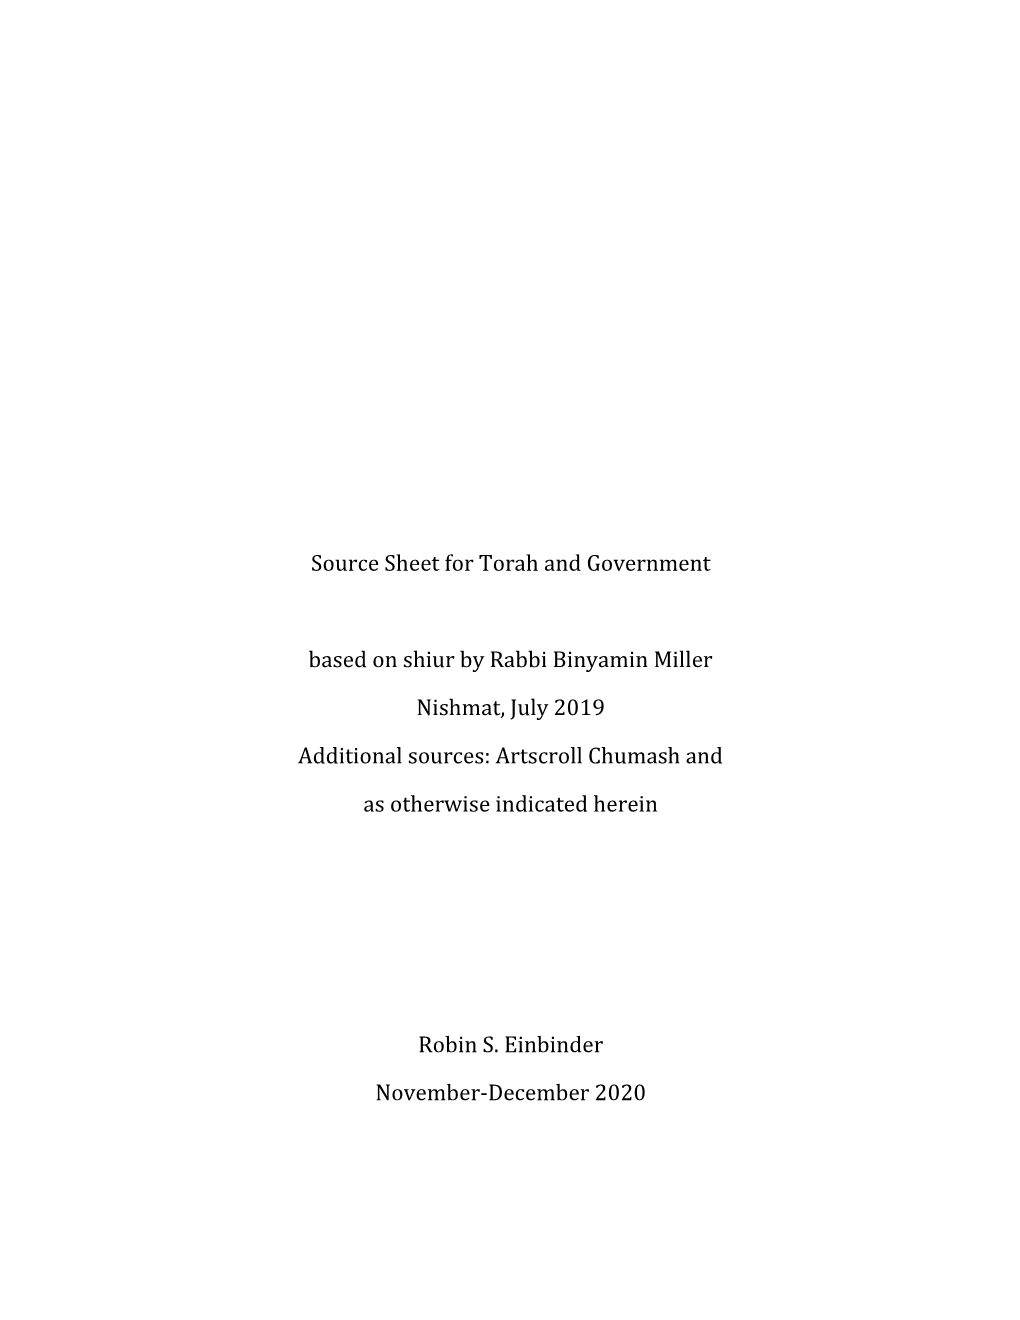 Source Sheet for Torah and Government Based on Shiur By